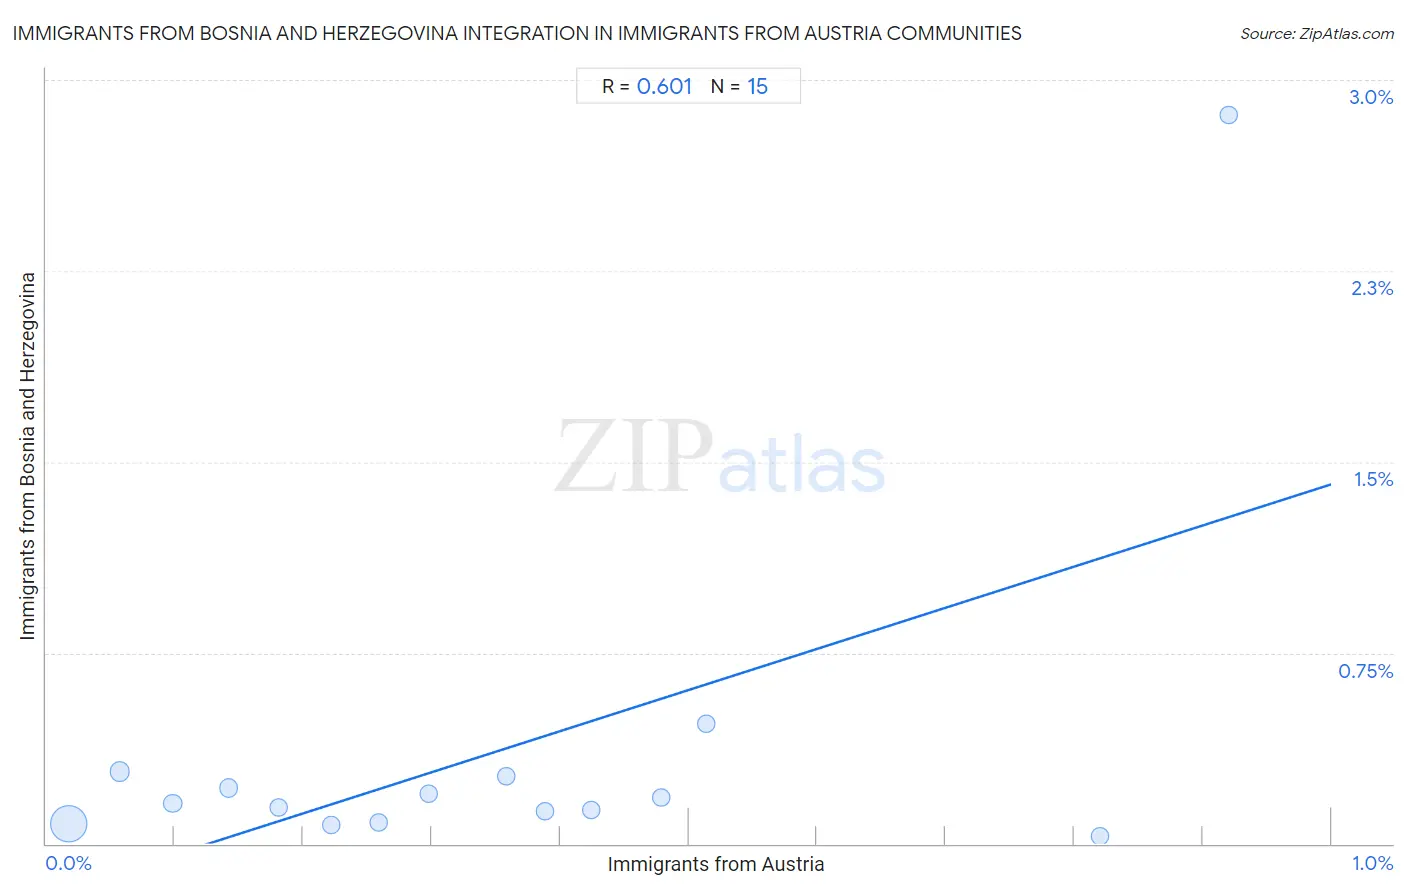 Immigrants from Austria Integration in Immigrants from Bosnia and Herzegovina Communities